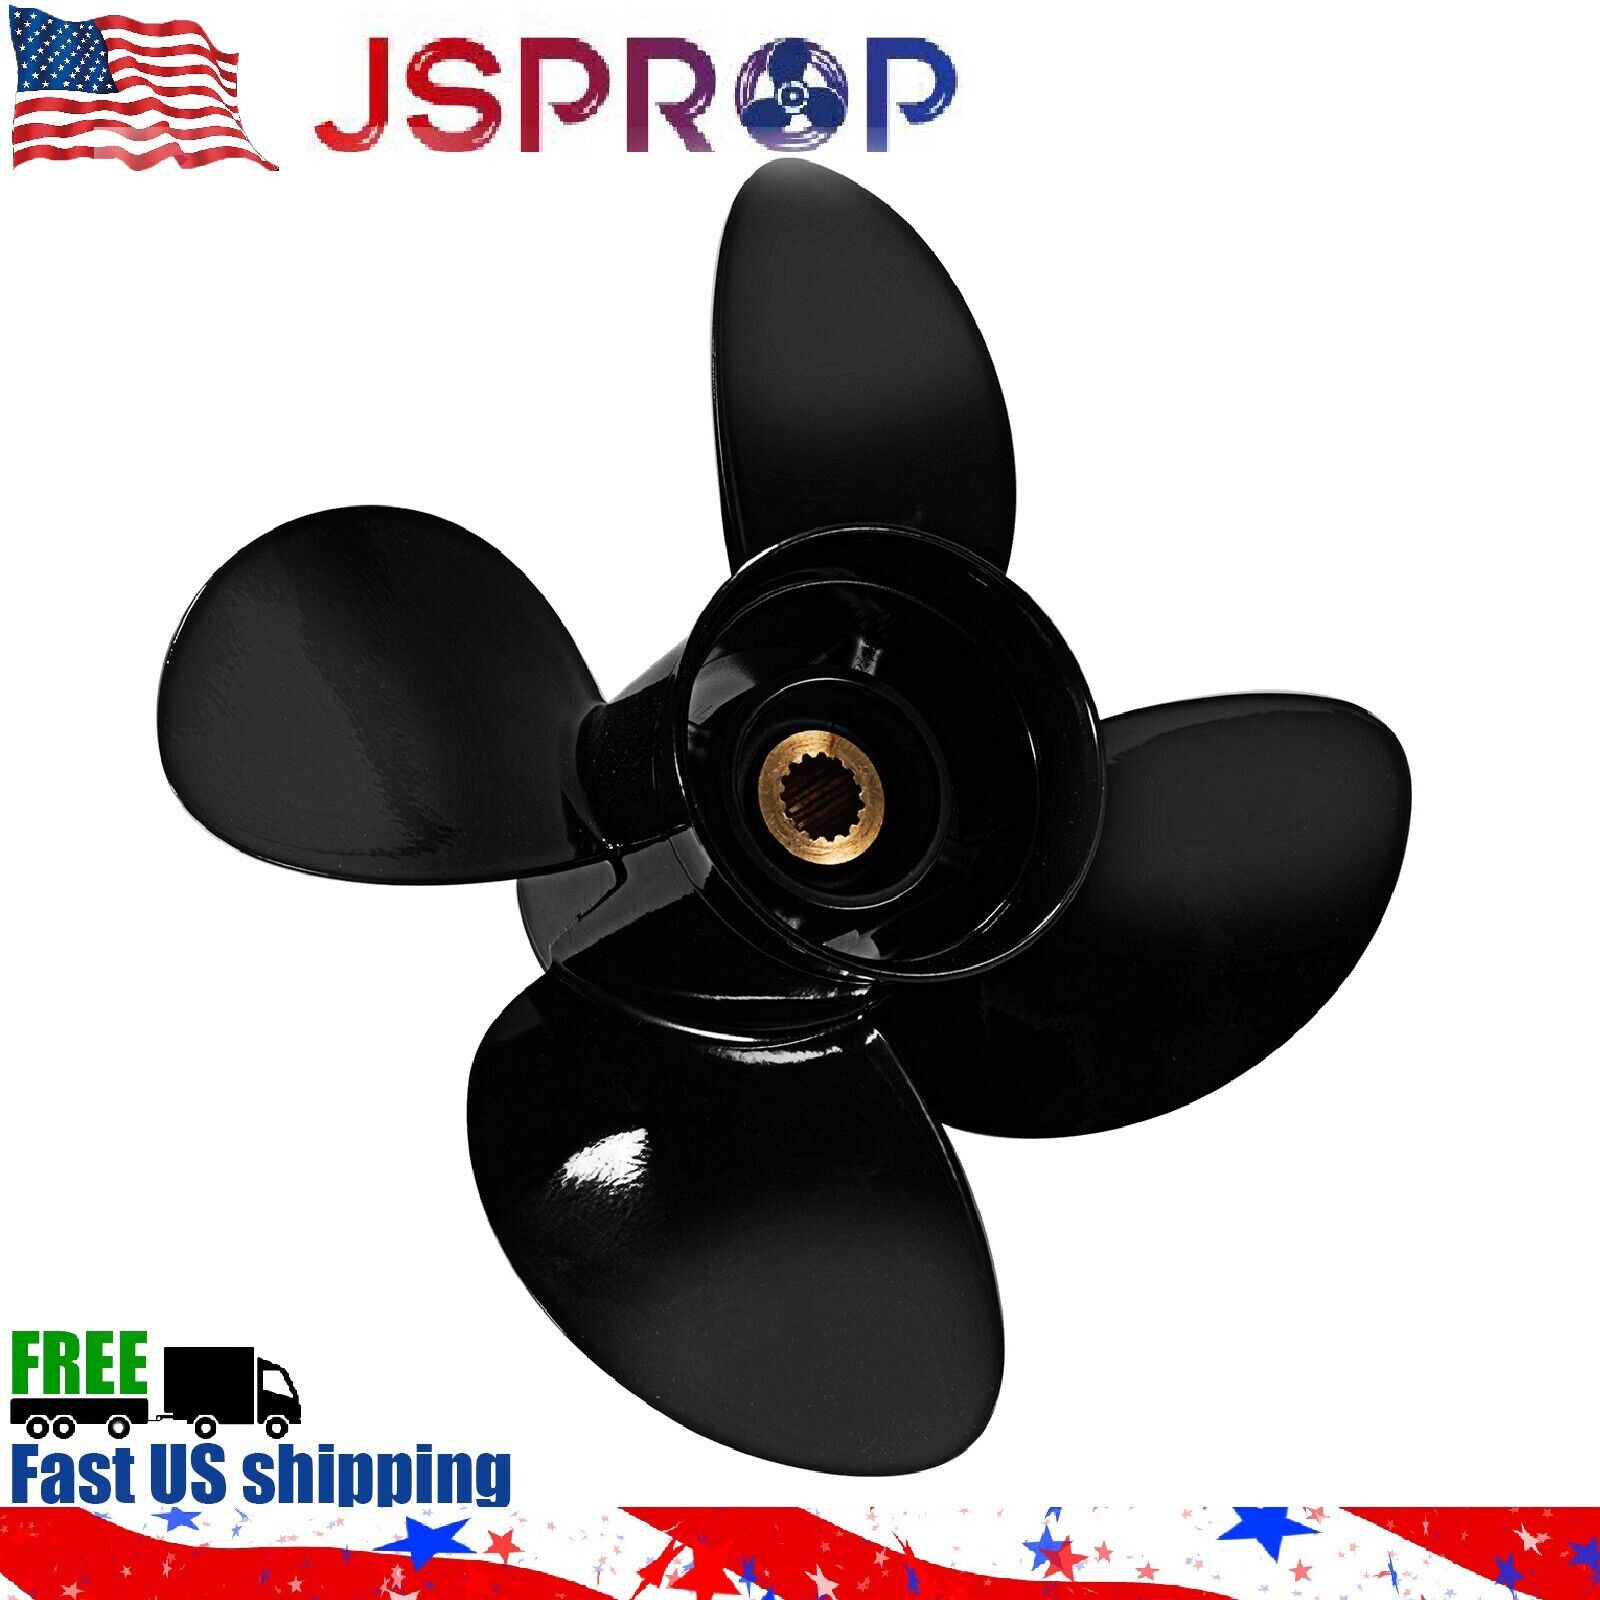 OEM 14 1/2x17 Boat Propeller fit Yamaha Engines 130-300HP 15 Tooth 4 Blades ,RH